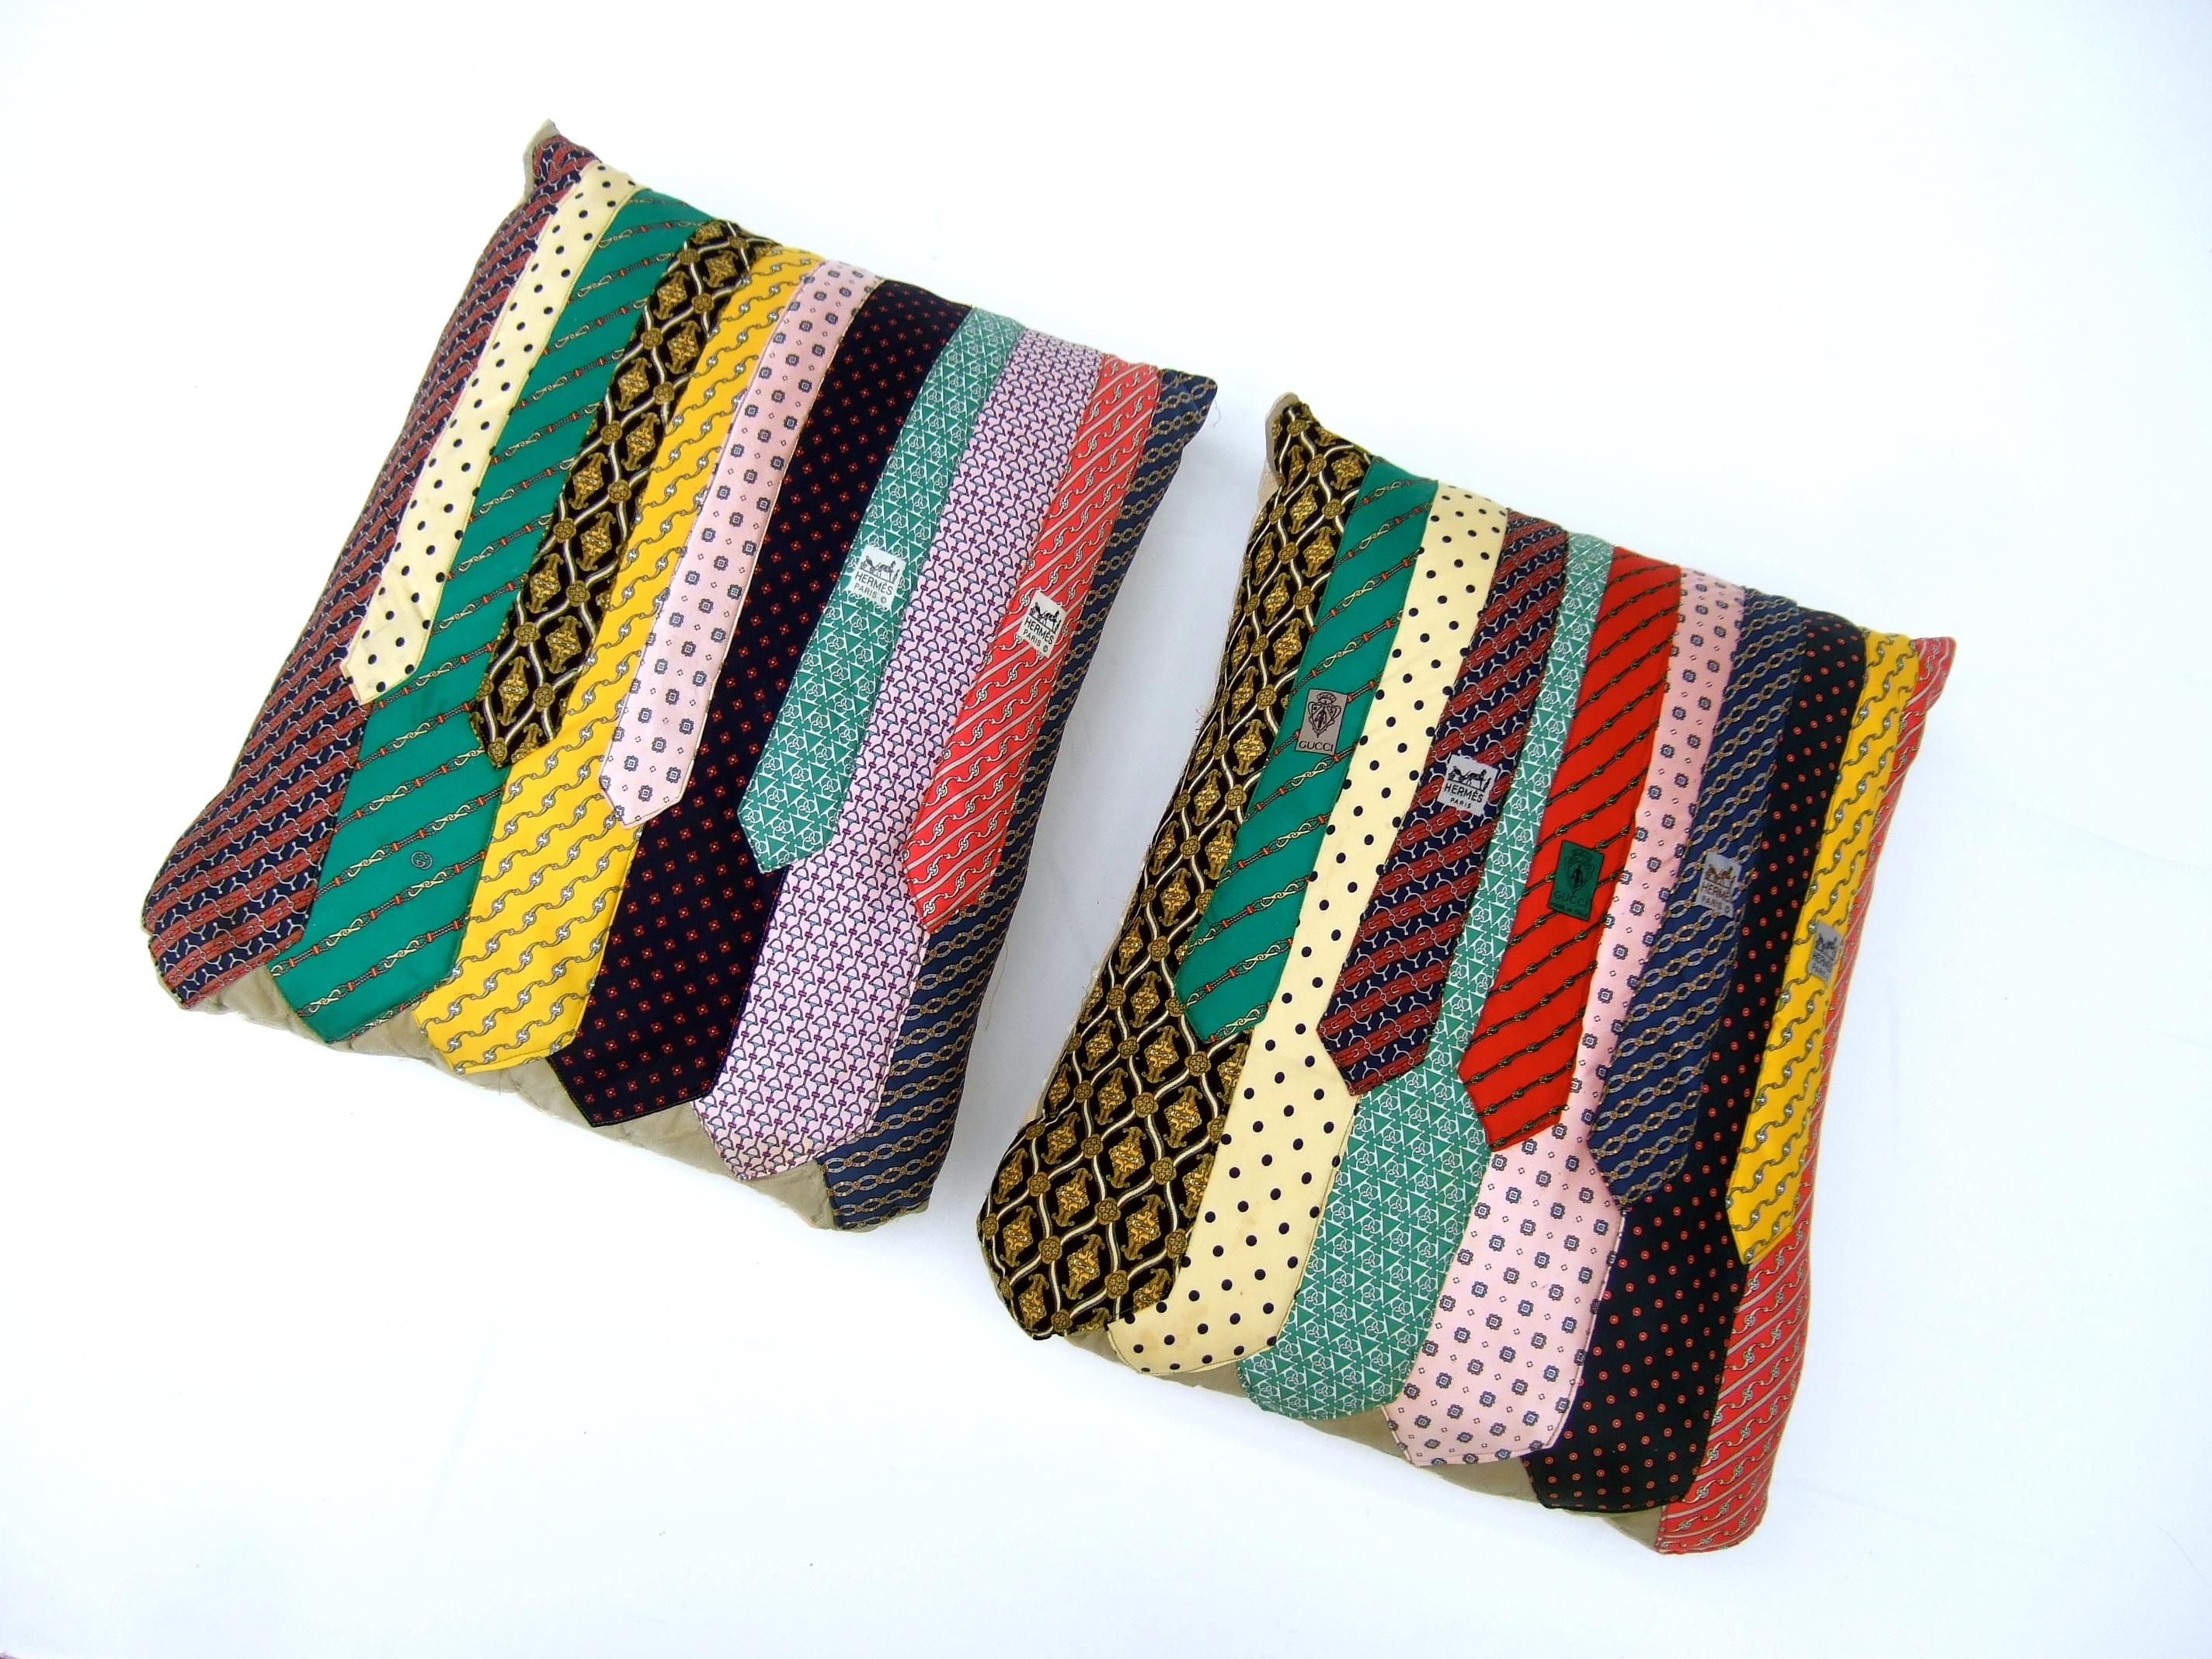 Unique pair of handmade Hermes & Gucci vintage up-cycled silk necktie pillows c 1980s 
The pair of decorative pillows are designed primarily with a collection 
of vintage Hermes & Gucci silk neckties. Some of neckties are unbranded  

The pair of